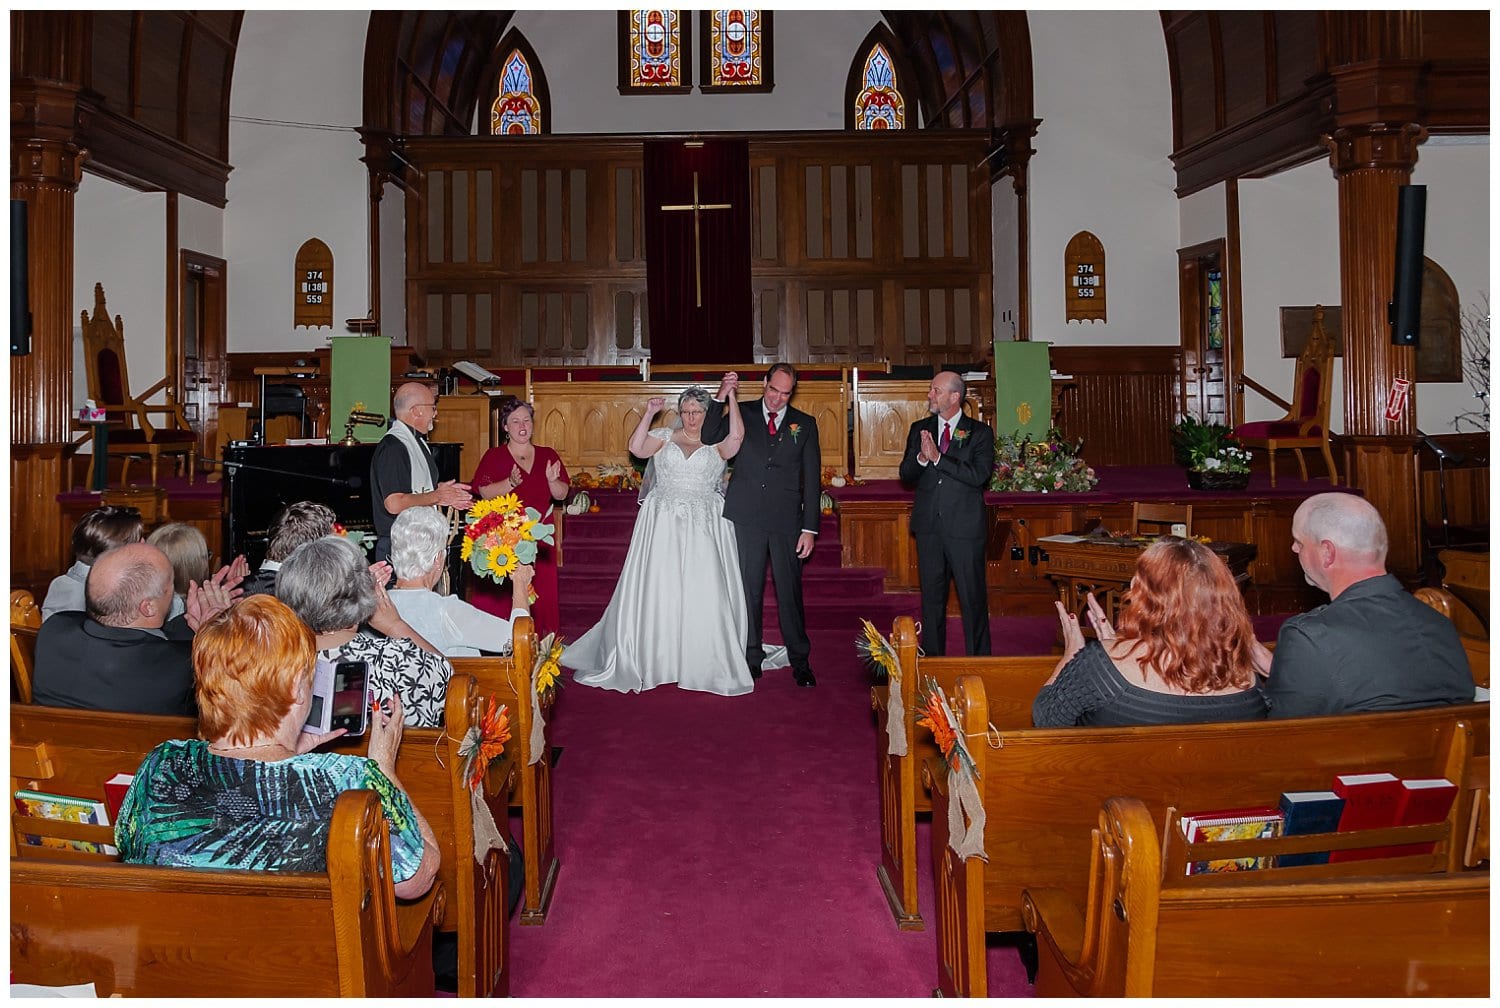 The wedding party, bride and groom stand at the alter of the church during their wedding ceremony in Windsor NS.